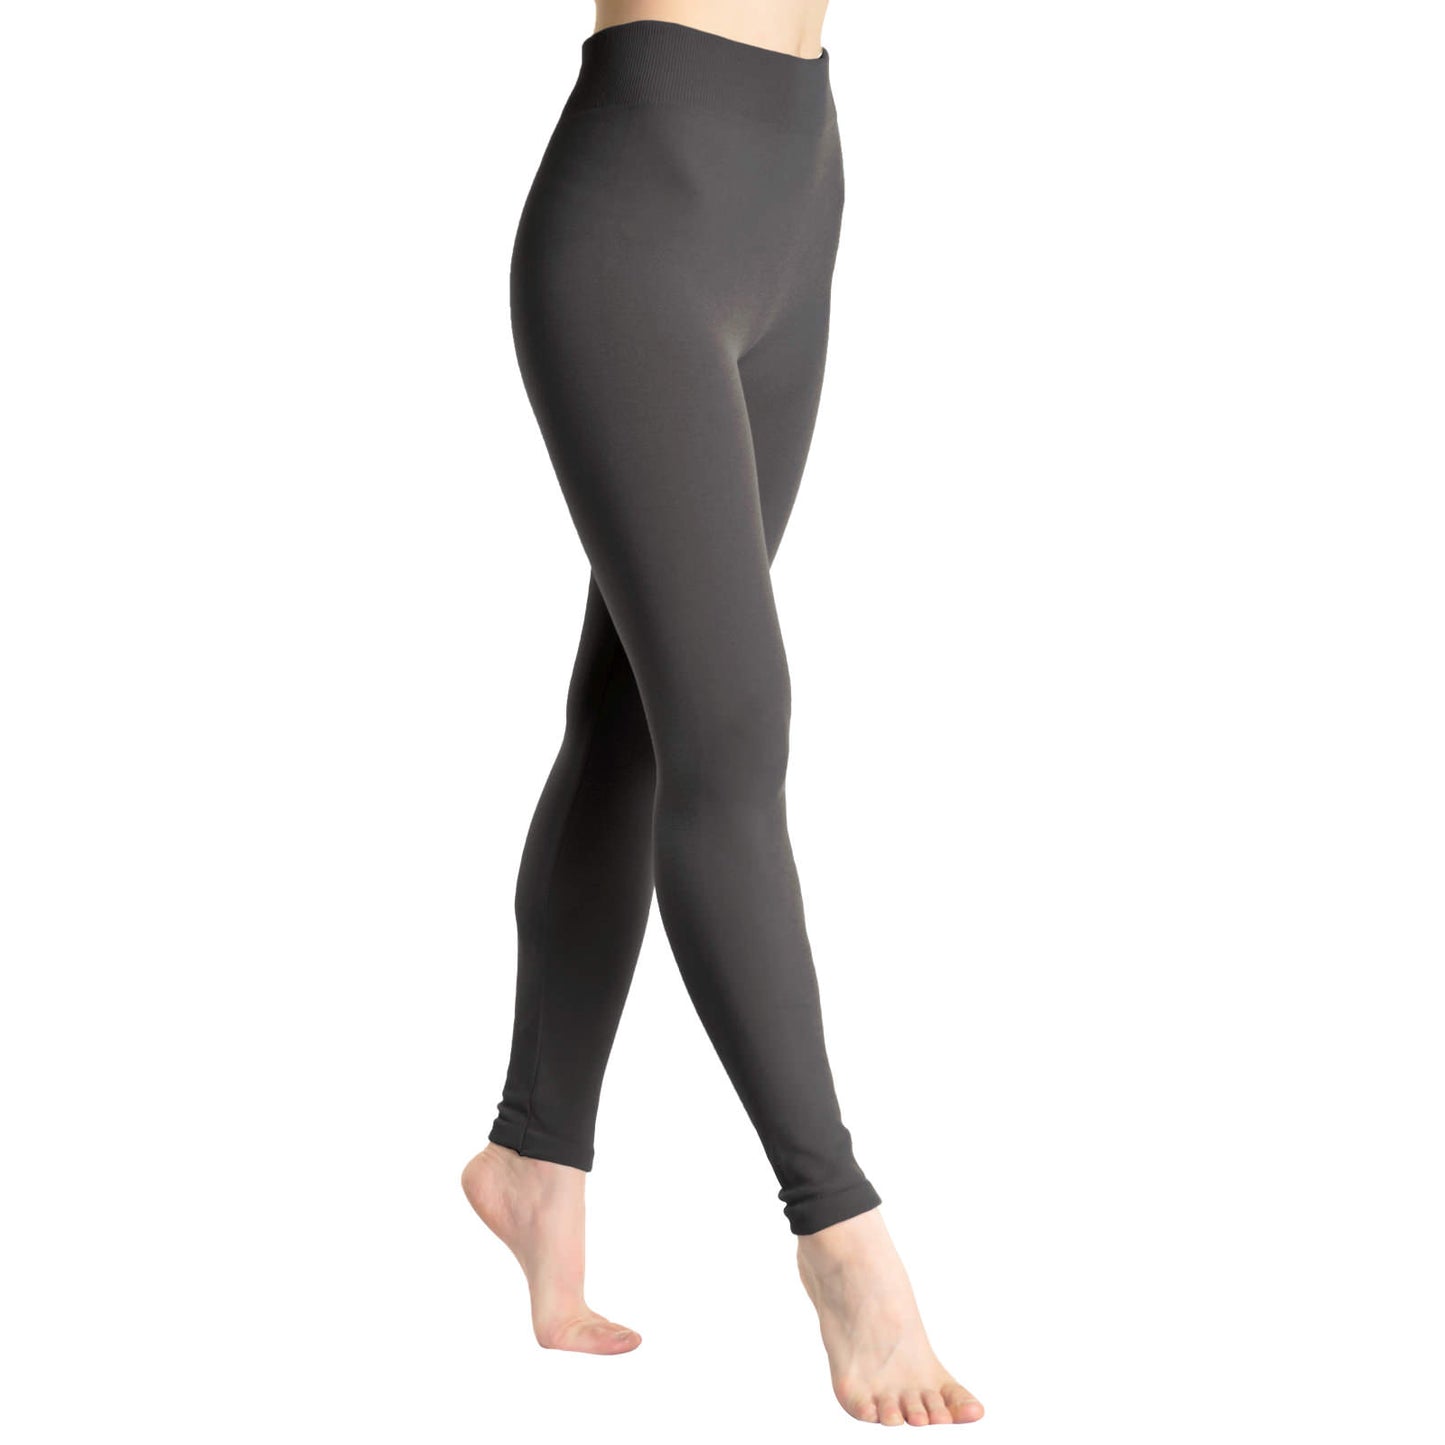 Seamless Footless Leggings with Winter Warmth Plus Lining (1-Pack)